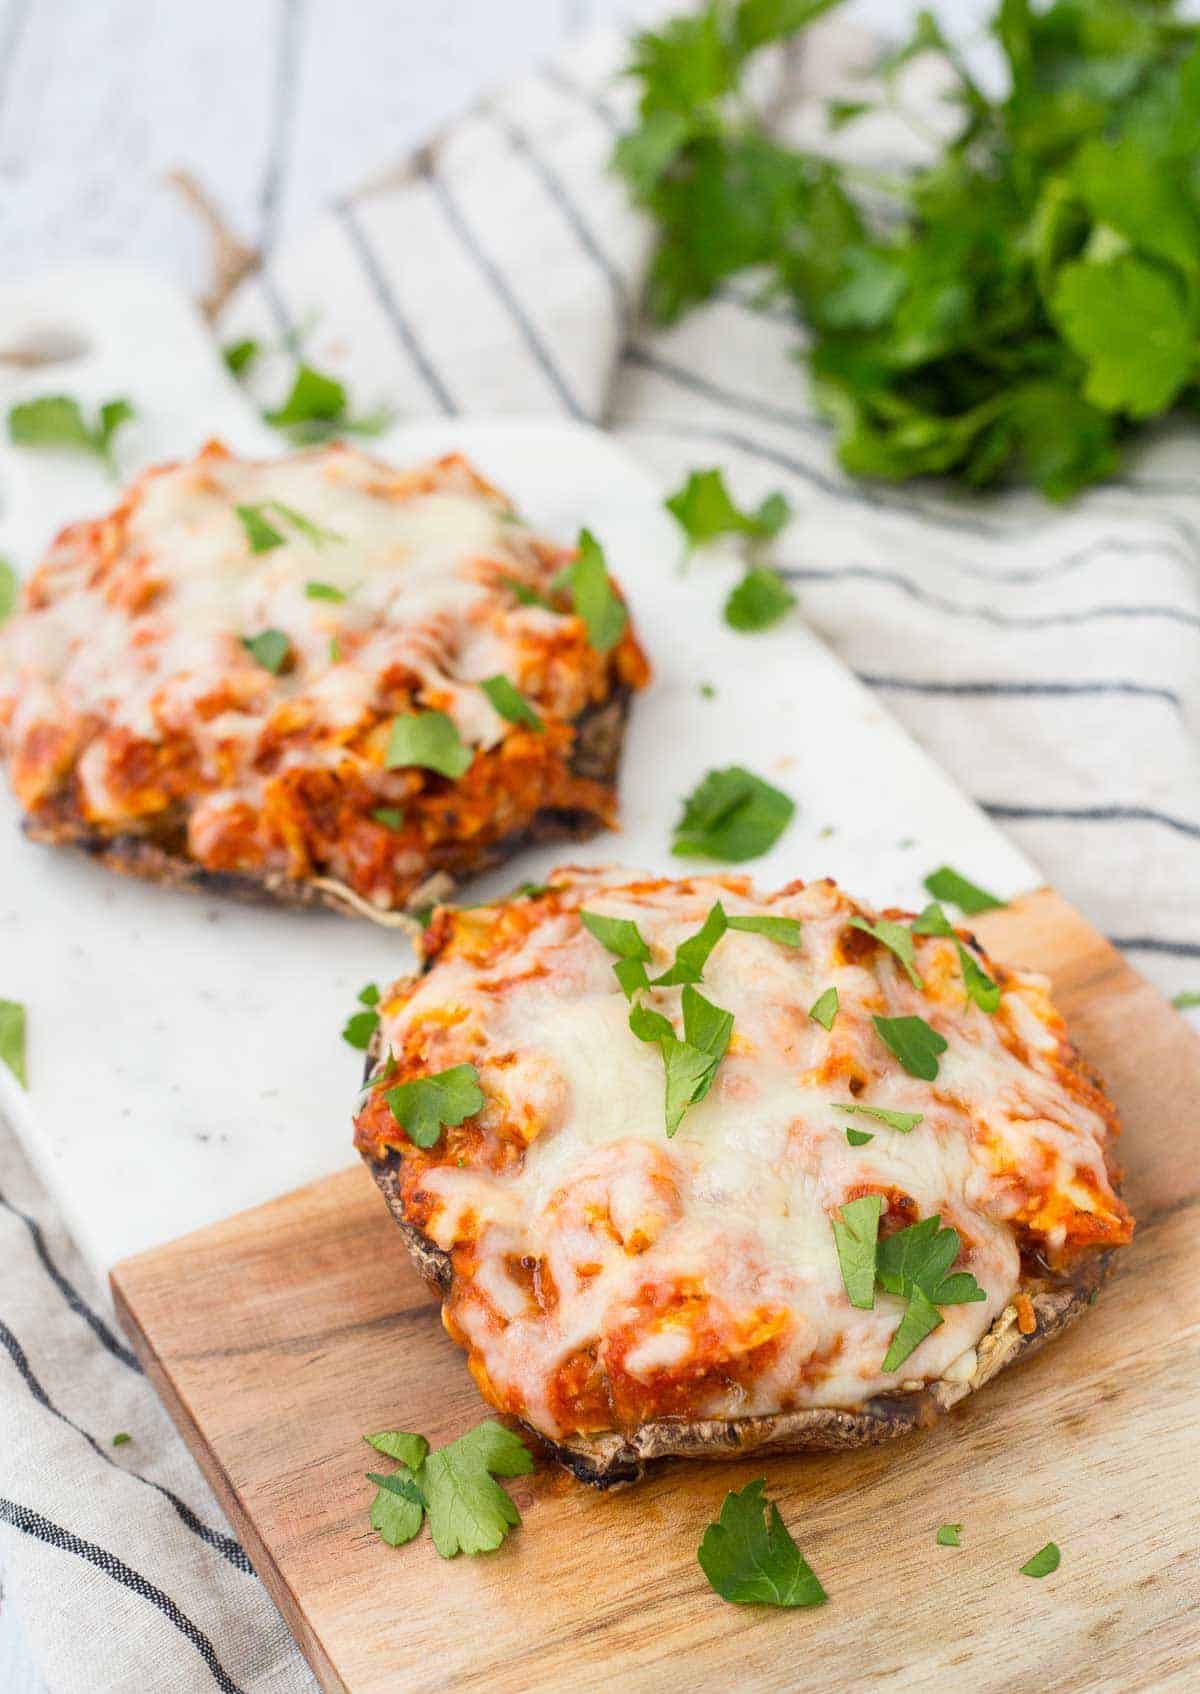 Two servings of chicken Parmesan on cutting board, garnished with chopped parsley.